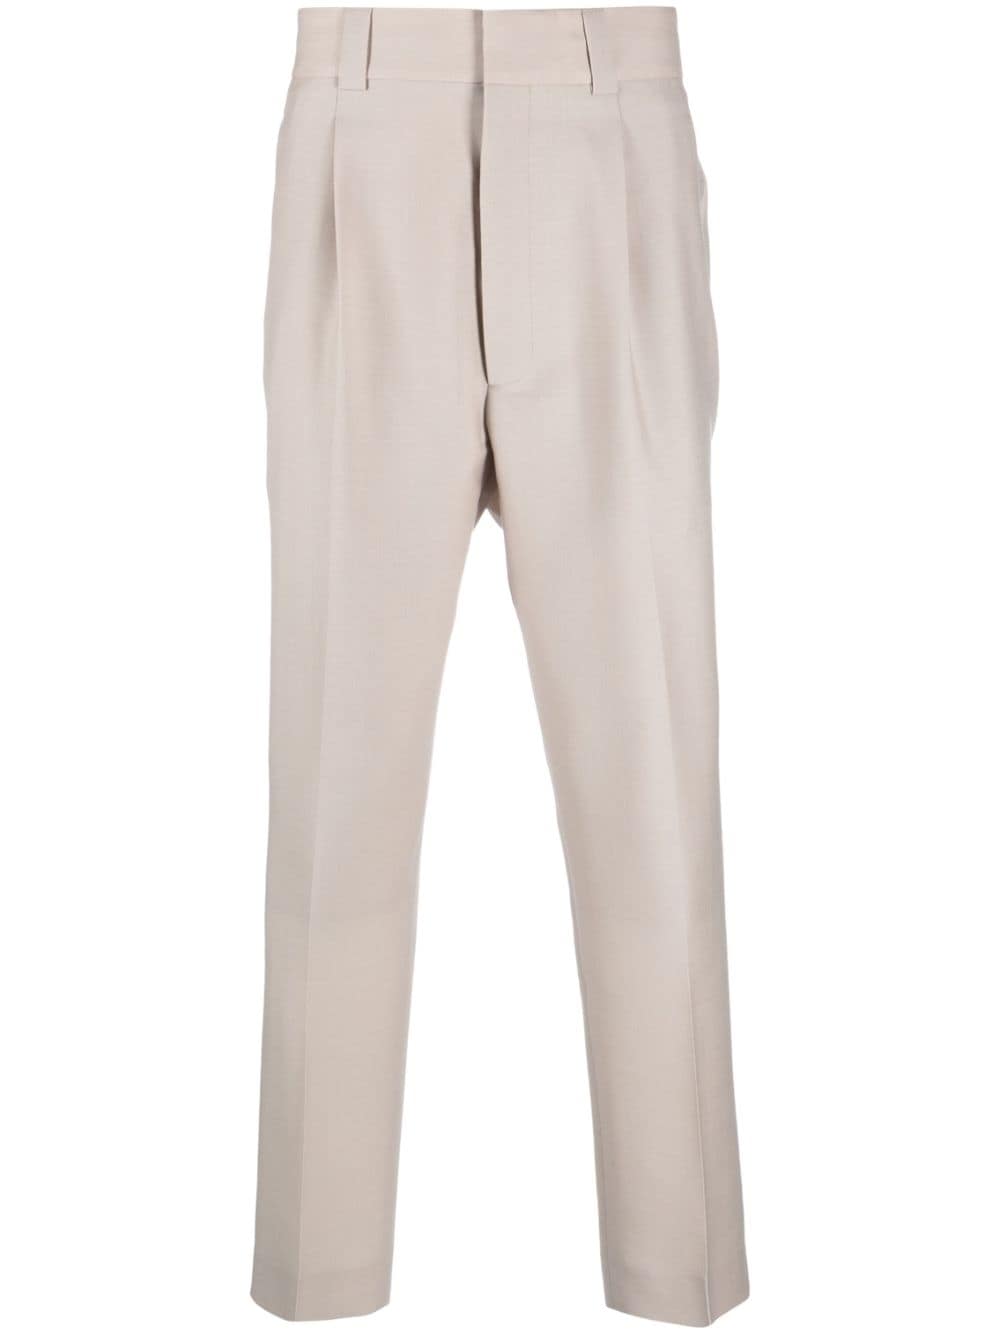 FEAR OF GOD PLEATED TAPERED-LEG TROUSERS